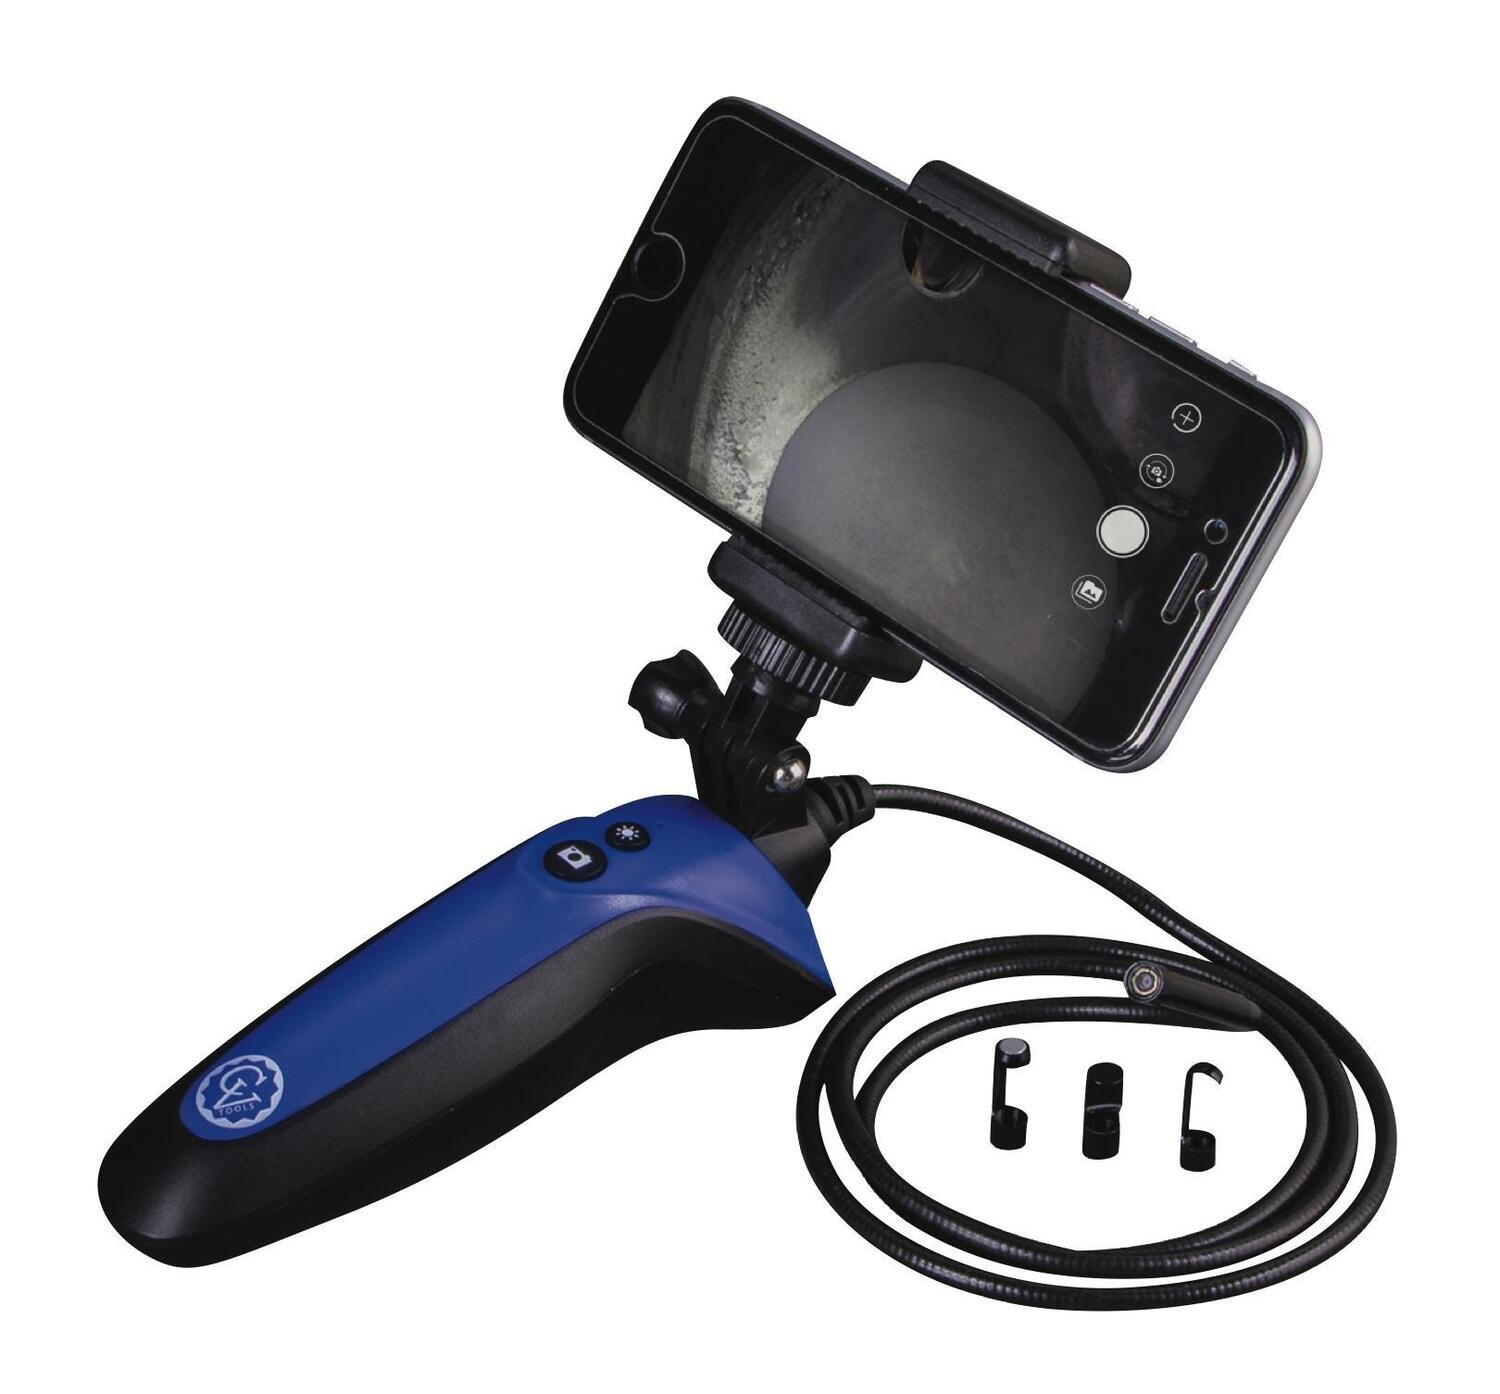 HR85 - Pistol Grip WiFi Borescope for Android™ & iPhone